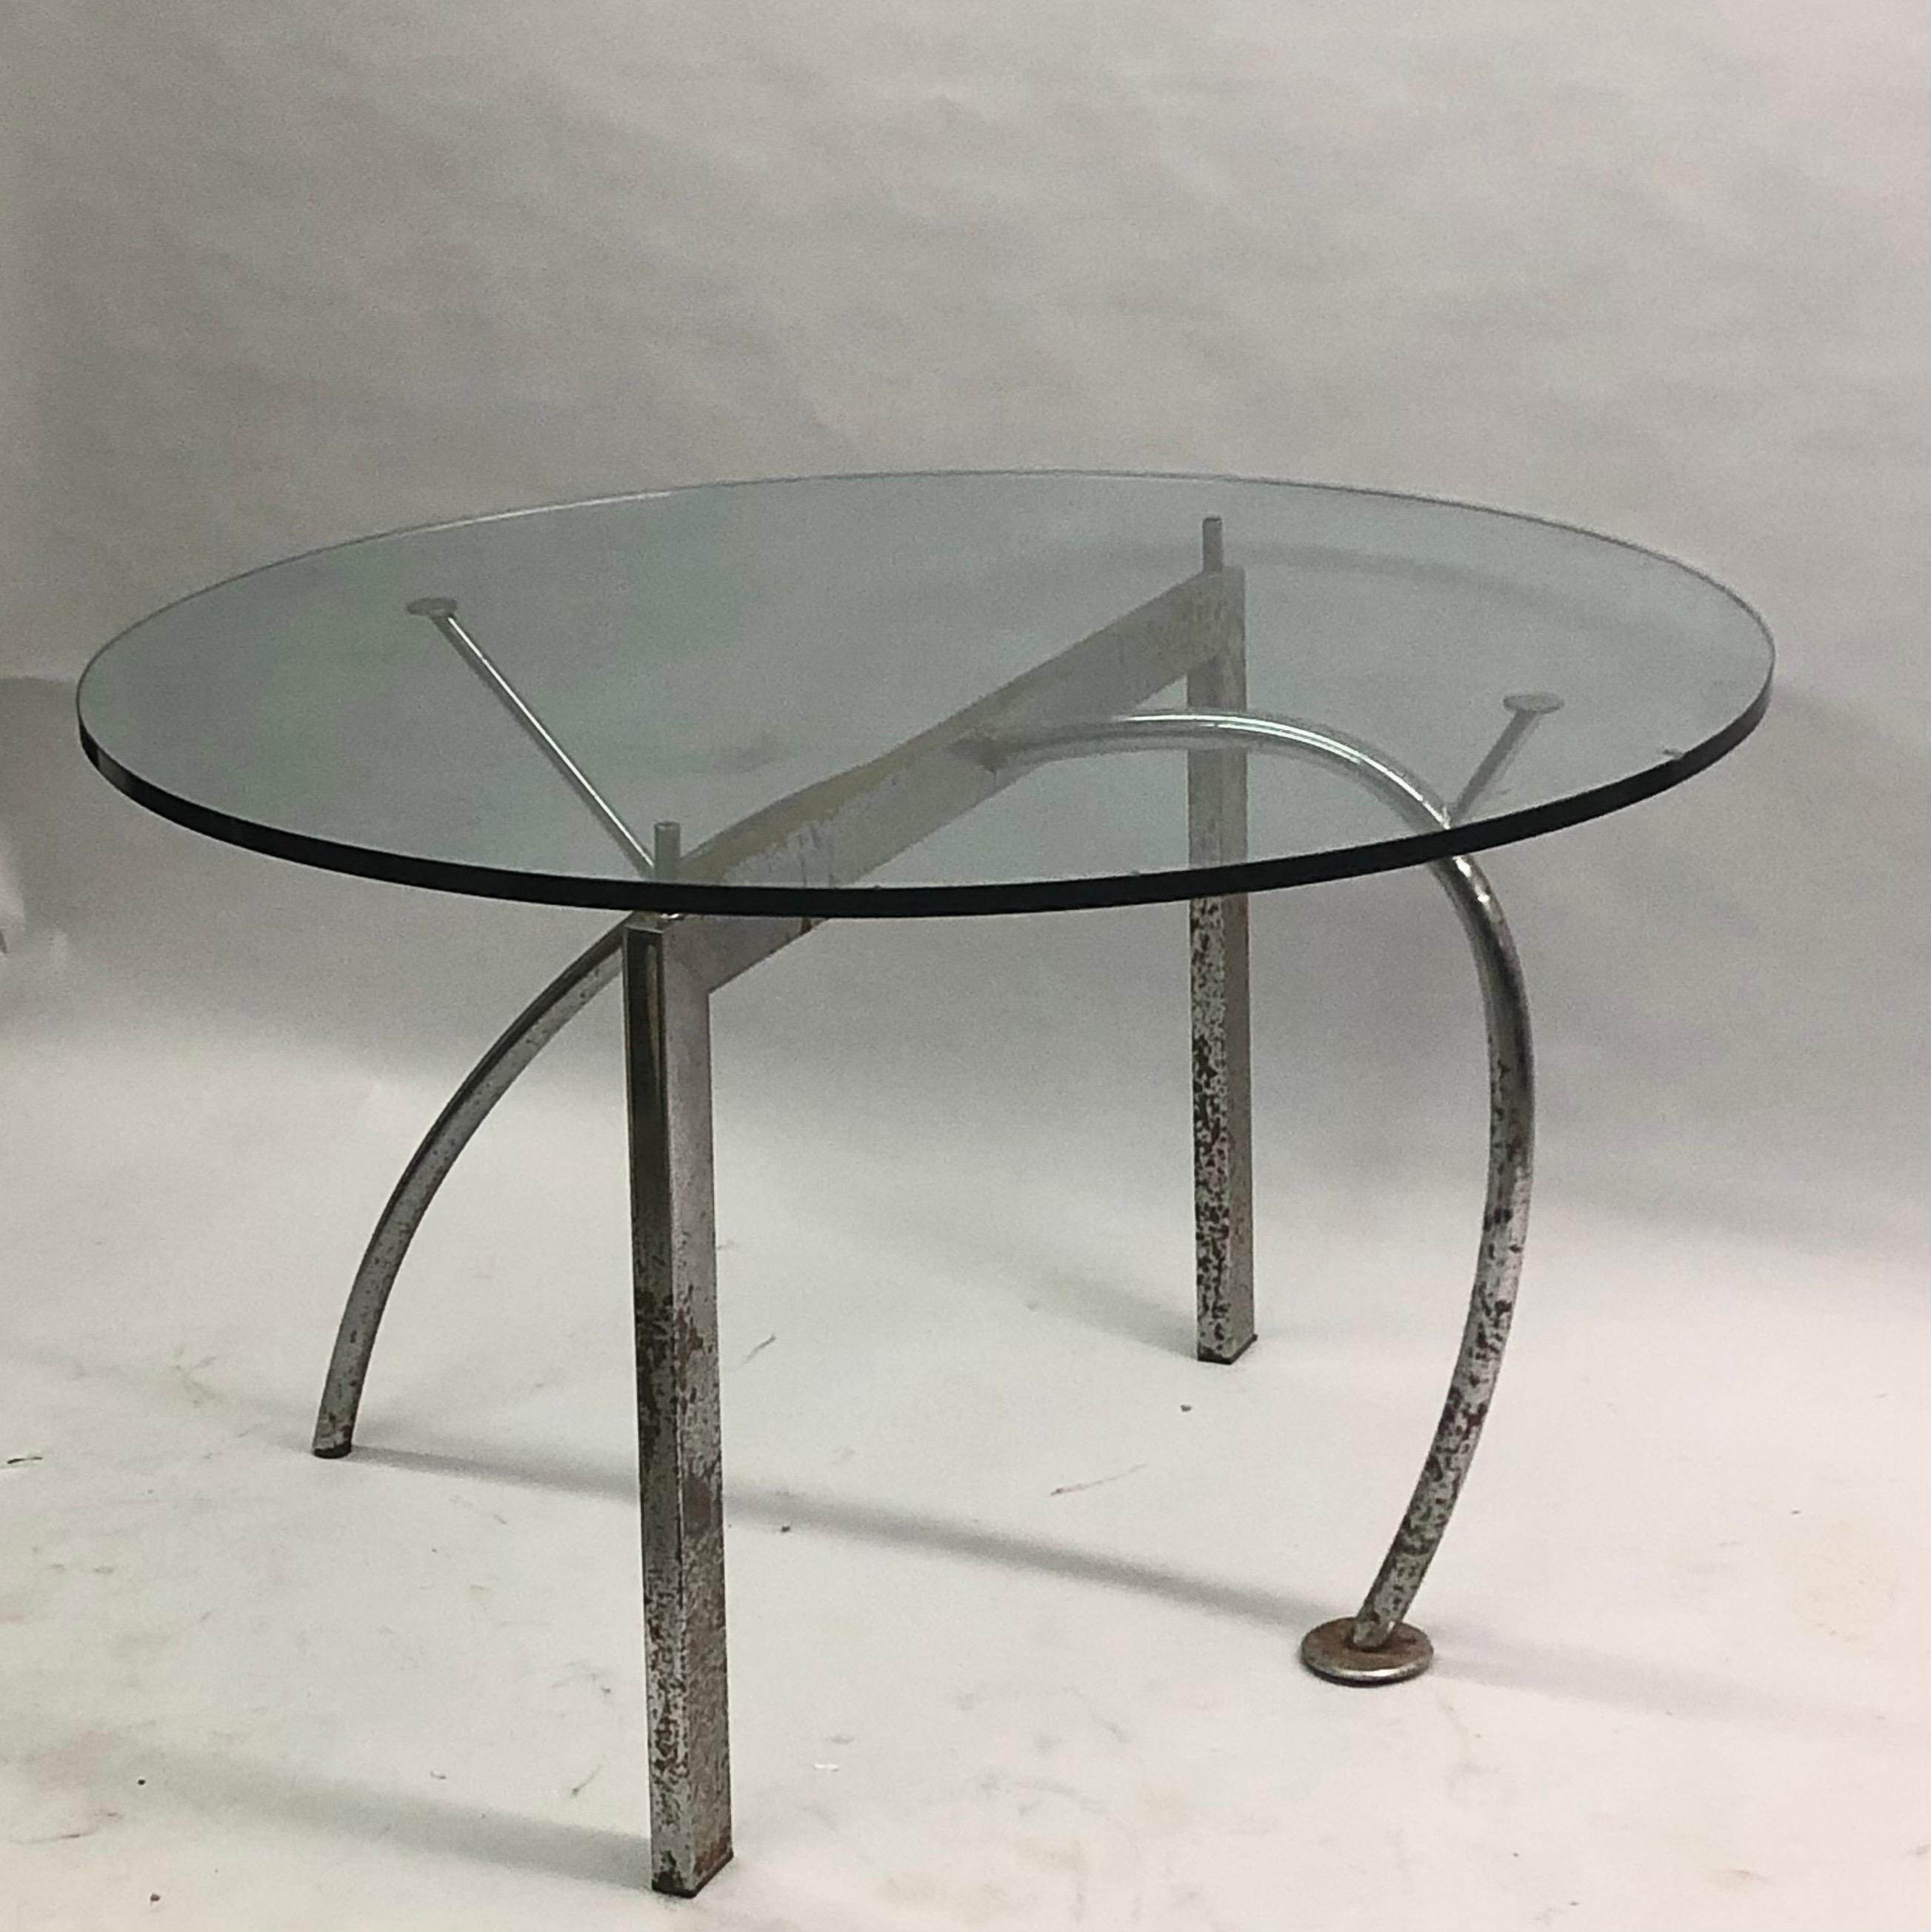 Rare and important Italian Post Modern dining table base by the legendary Memphis designer, Massimo Iosa-Ghini. The table is a prototype from a small edition and a prime example of the designer's early Bolidist architecture and design. Iosa Ghini is